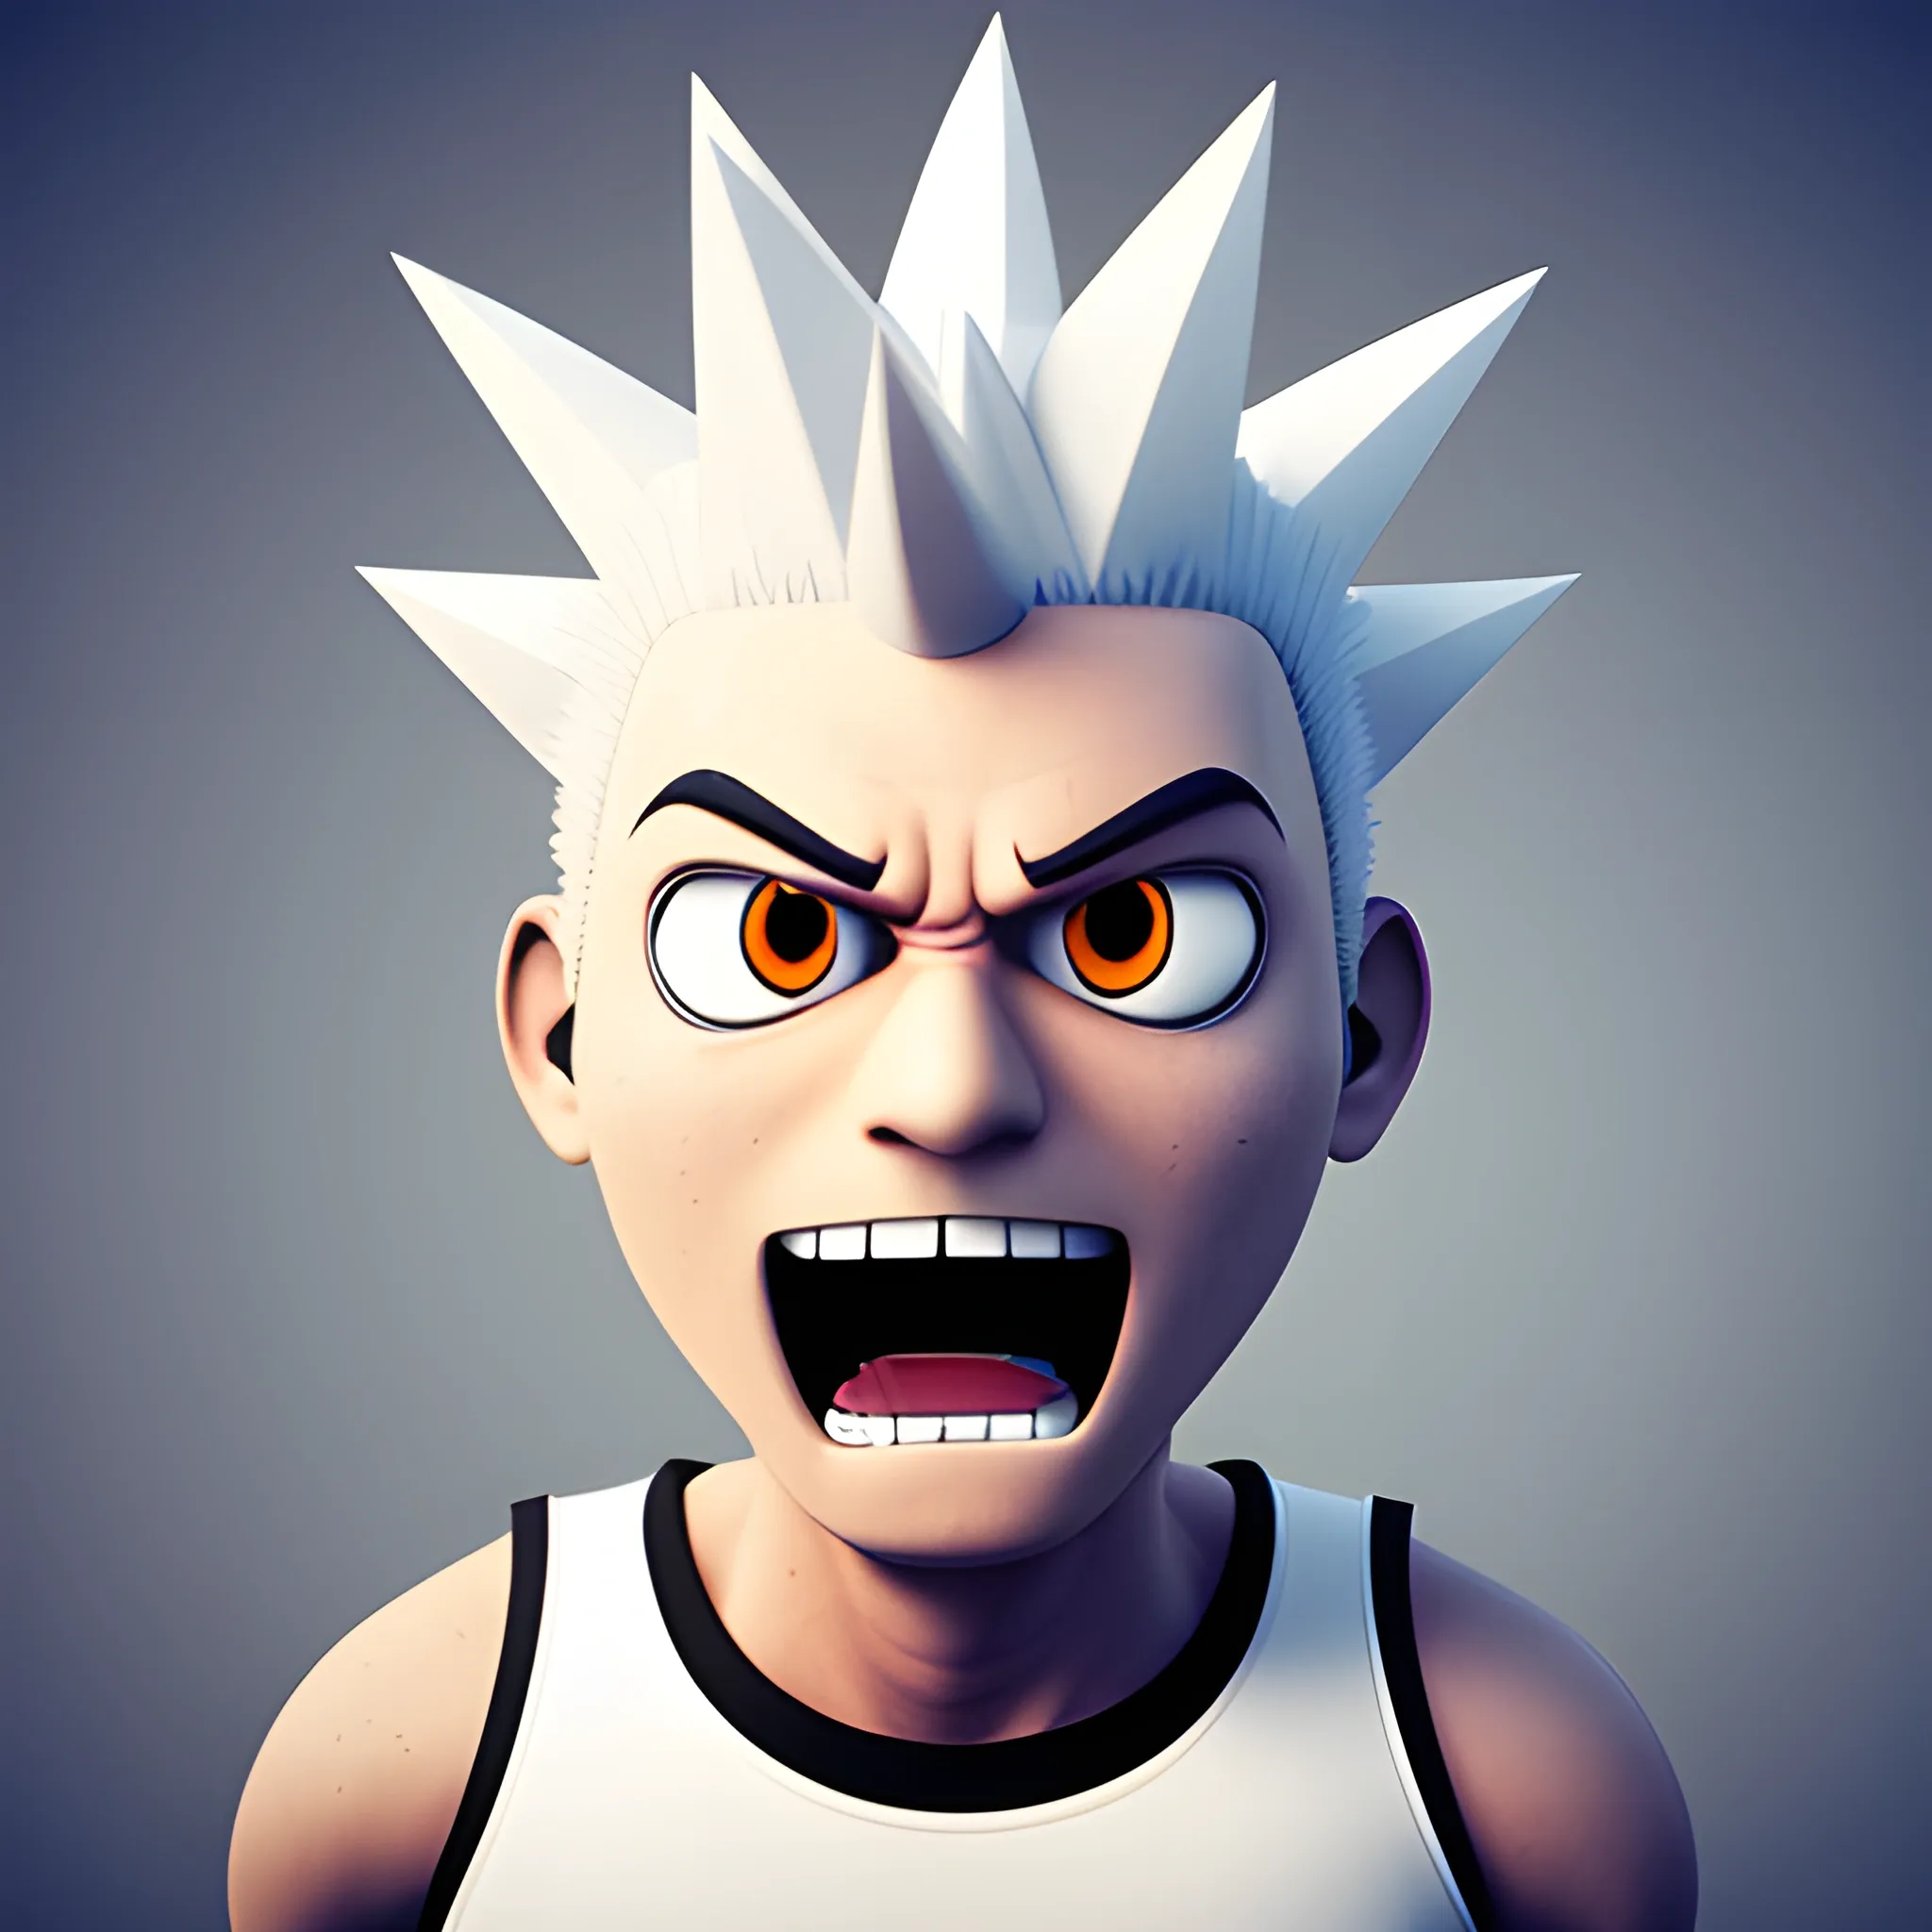 
3D White Spiky Head Punk Mascot Facing front, Without left eye